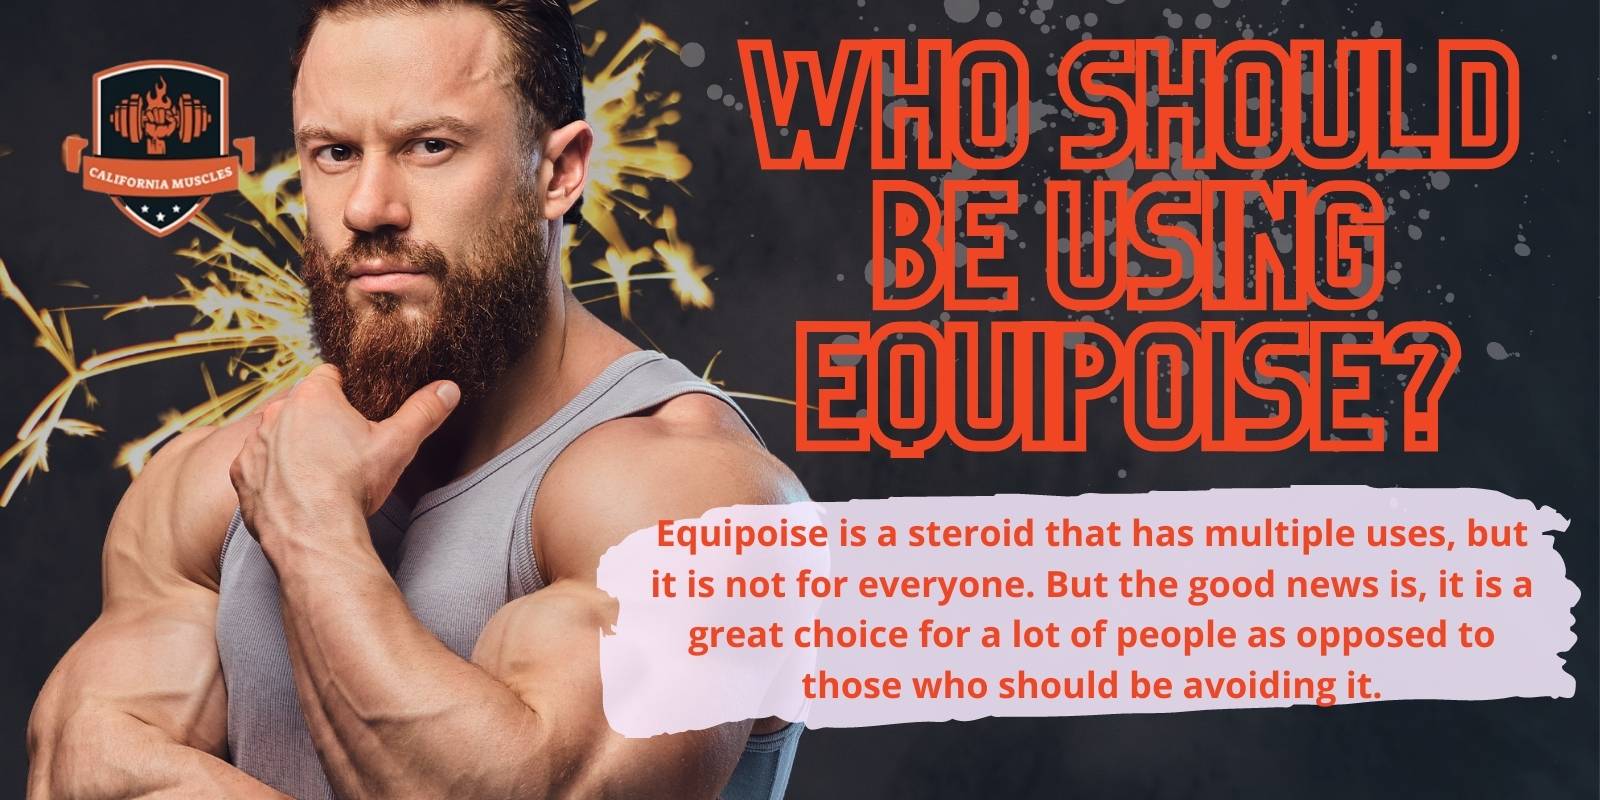 Who should be using Equipoise?